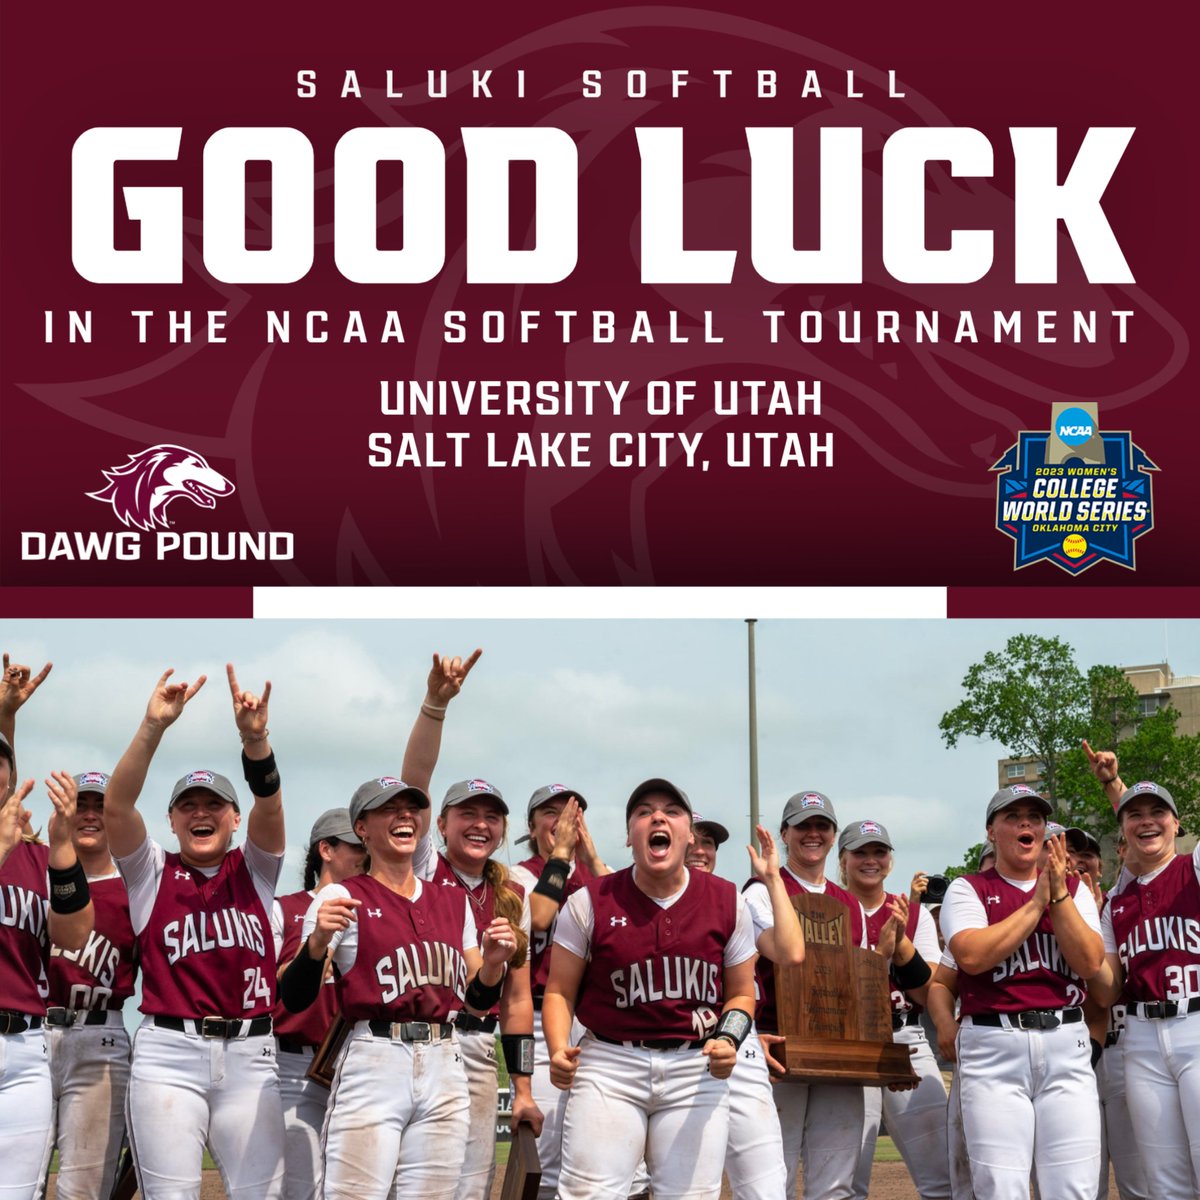 Good Luck @siu_softball! Watch Party at Carbondale Buffalo Wild Wings starting at 2:30pm!! Info here: fb.me/e/TQYuF0TB